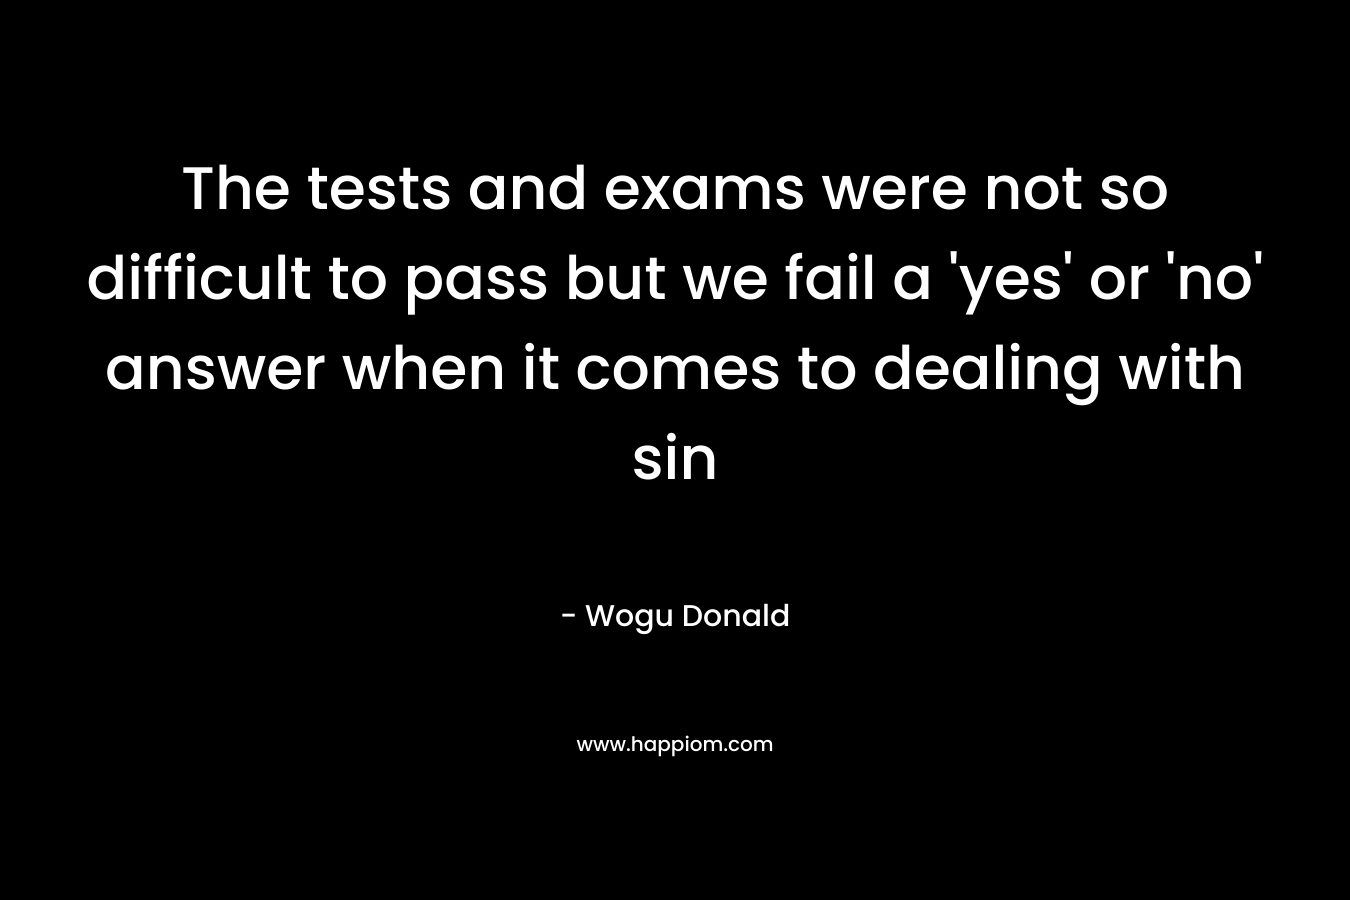 The tests and exams were not so difficult to pass but we fail a ‘yes’ or ‘no’ answer when it comes to dealing with sin – Wogu Donald